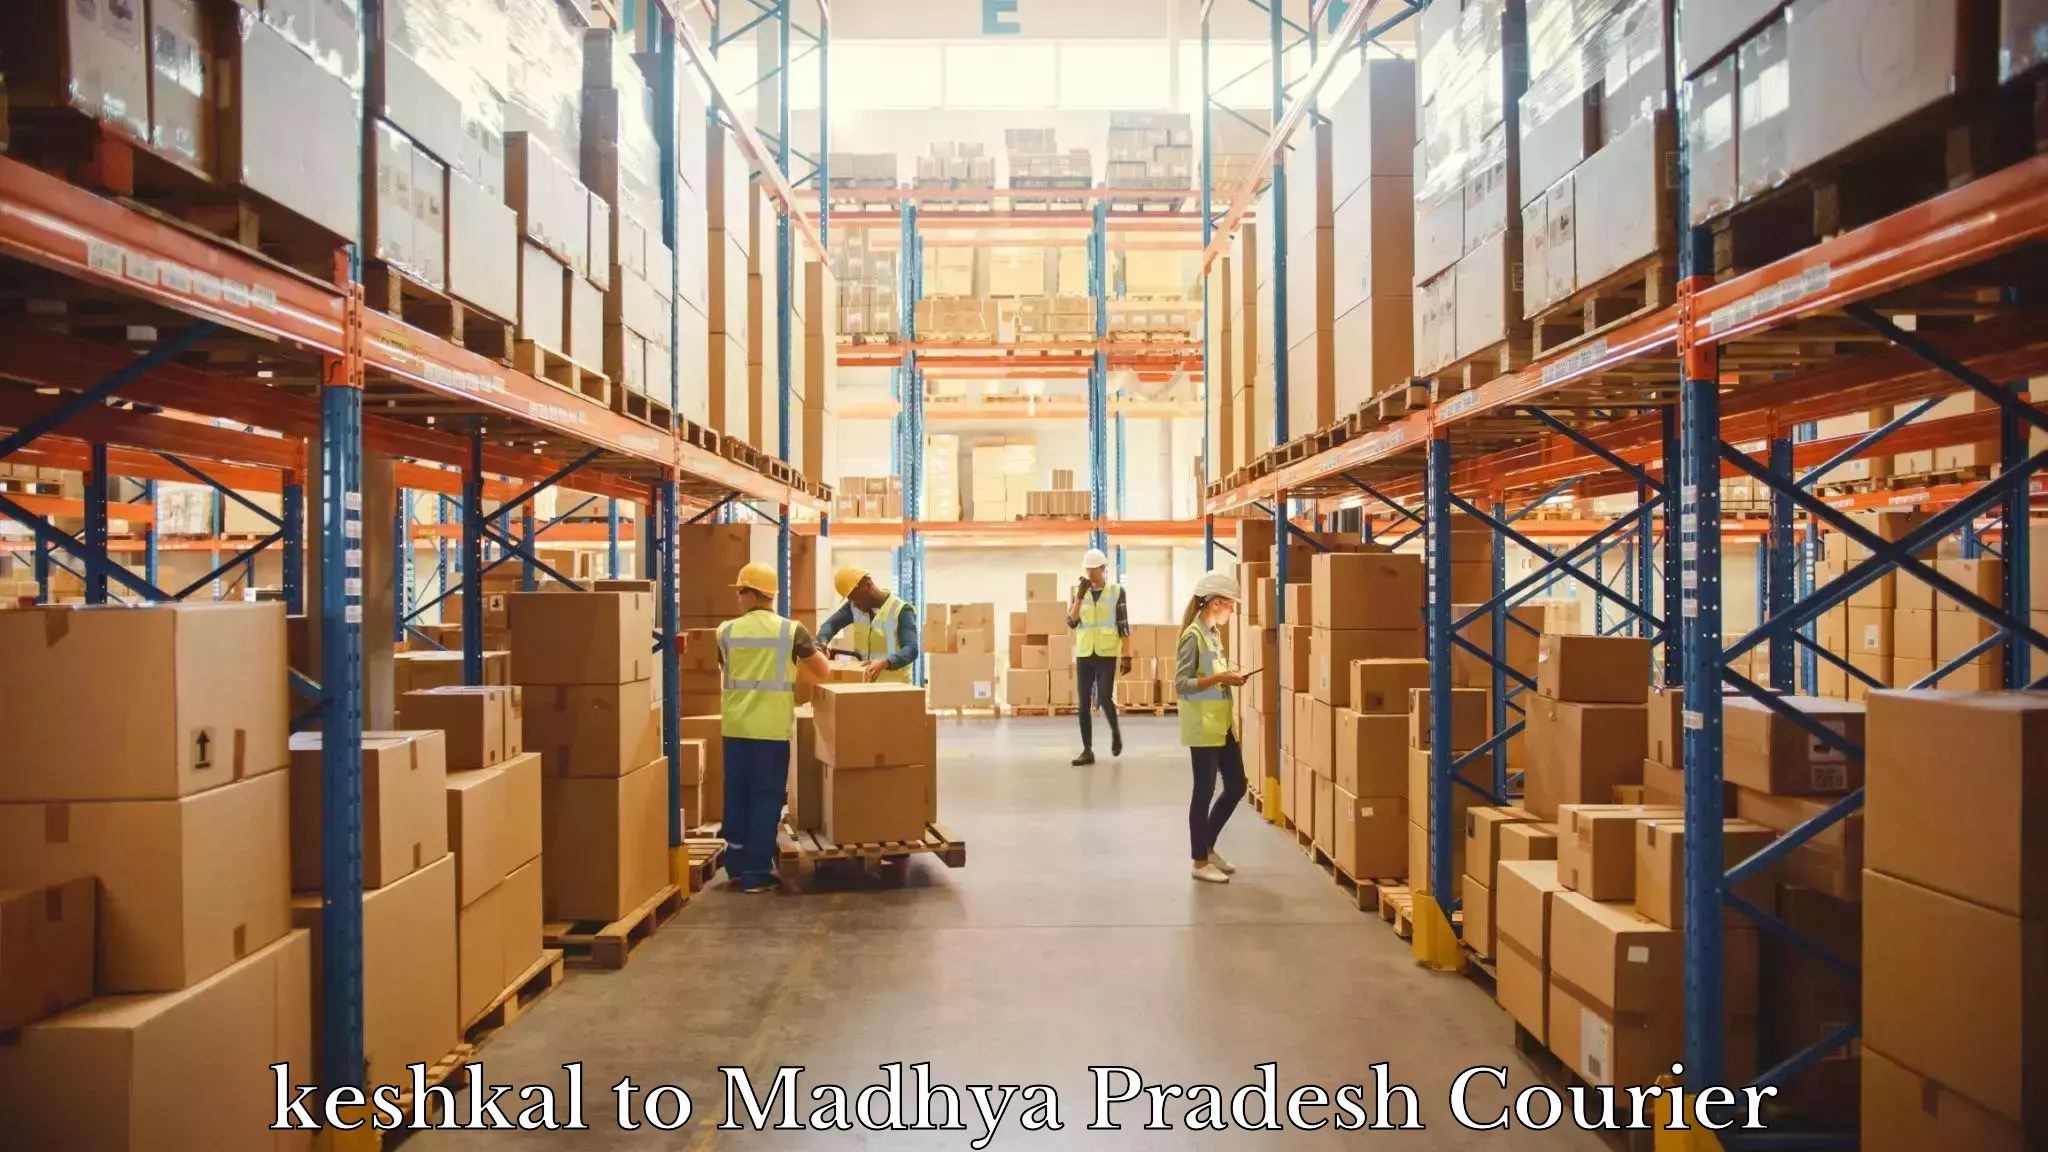 Business delivery service keshkal to Mandideep